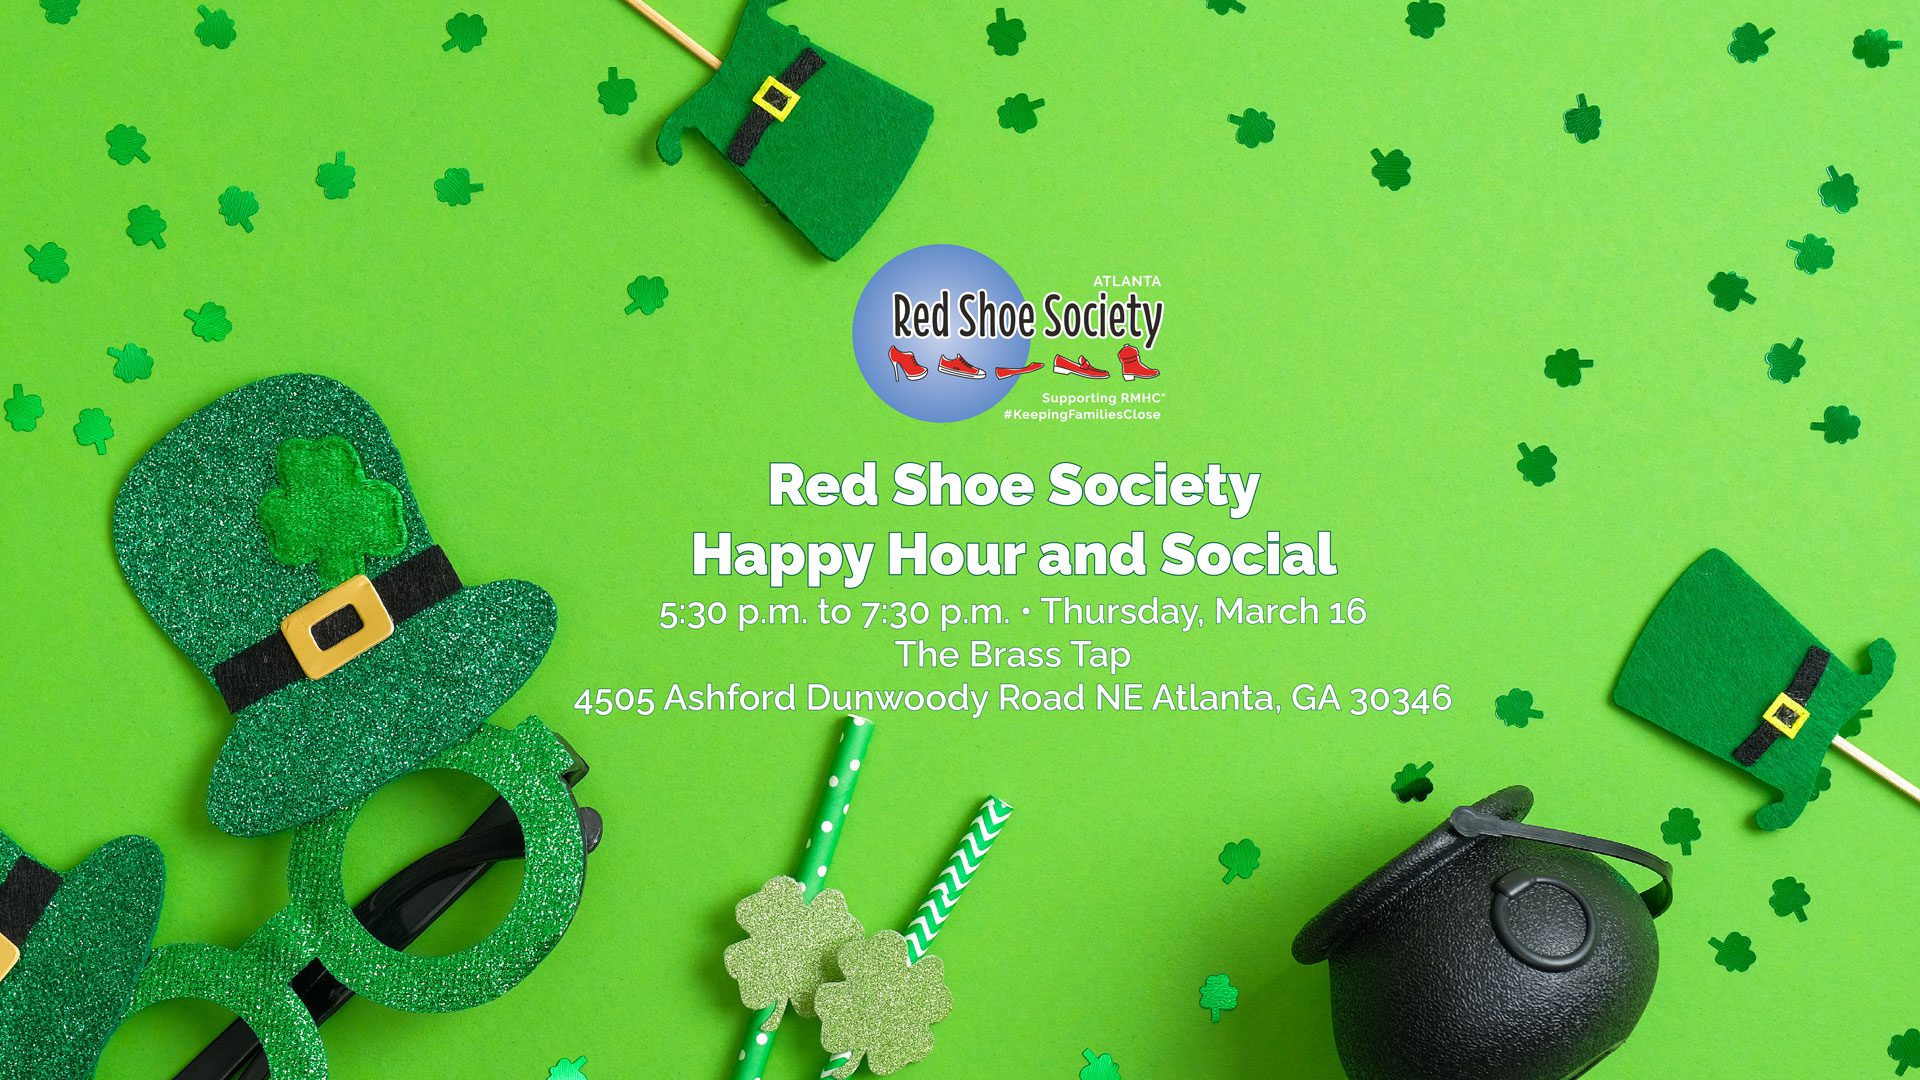 Red Shoe Society St. Patrick's Day Event